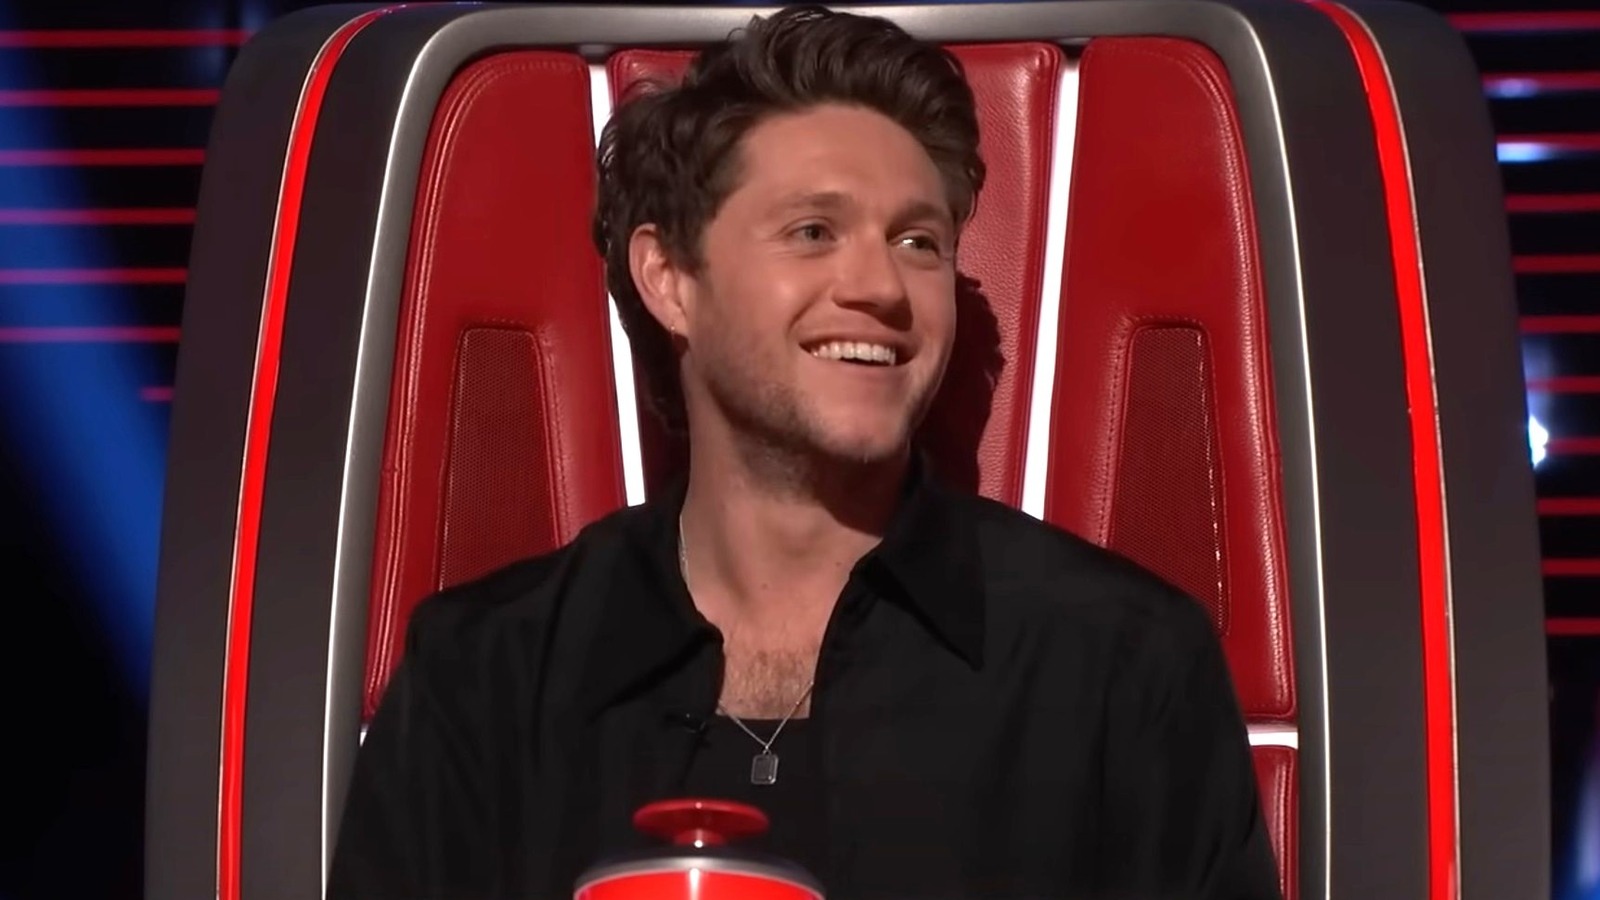 The Voice: Niall Horan Is Already Making An Impact As A New Coach